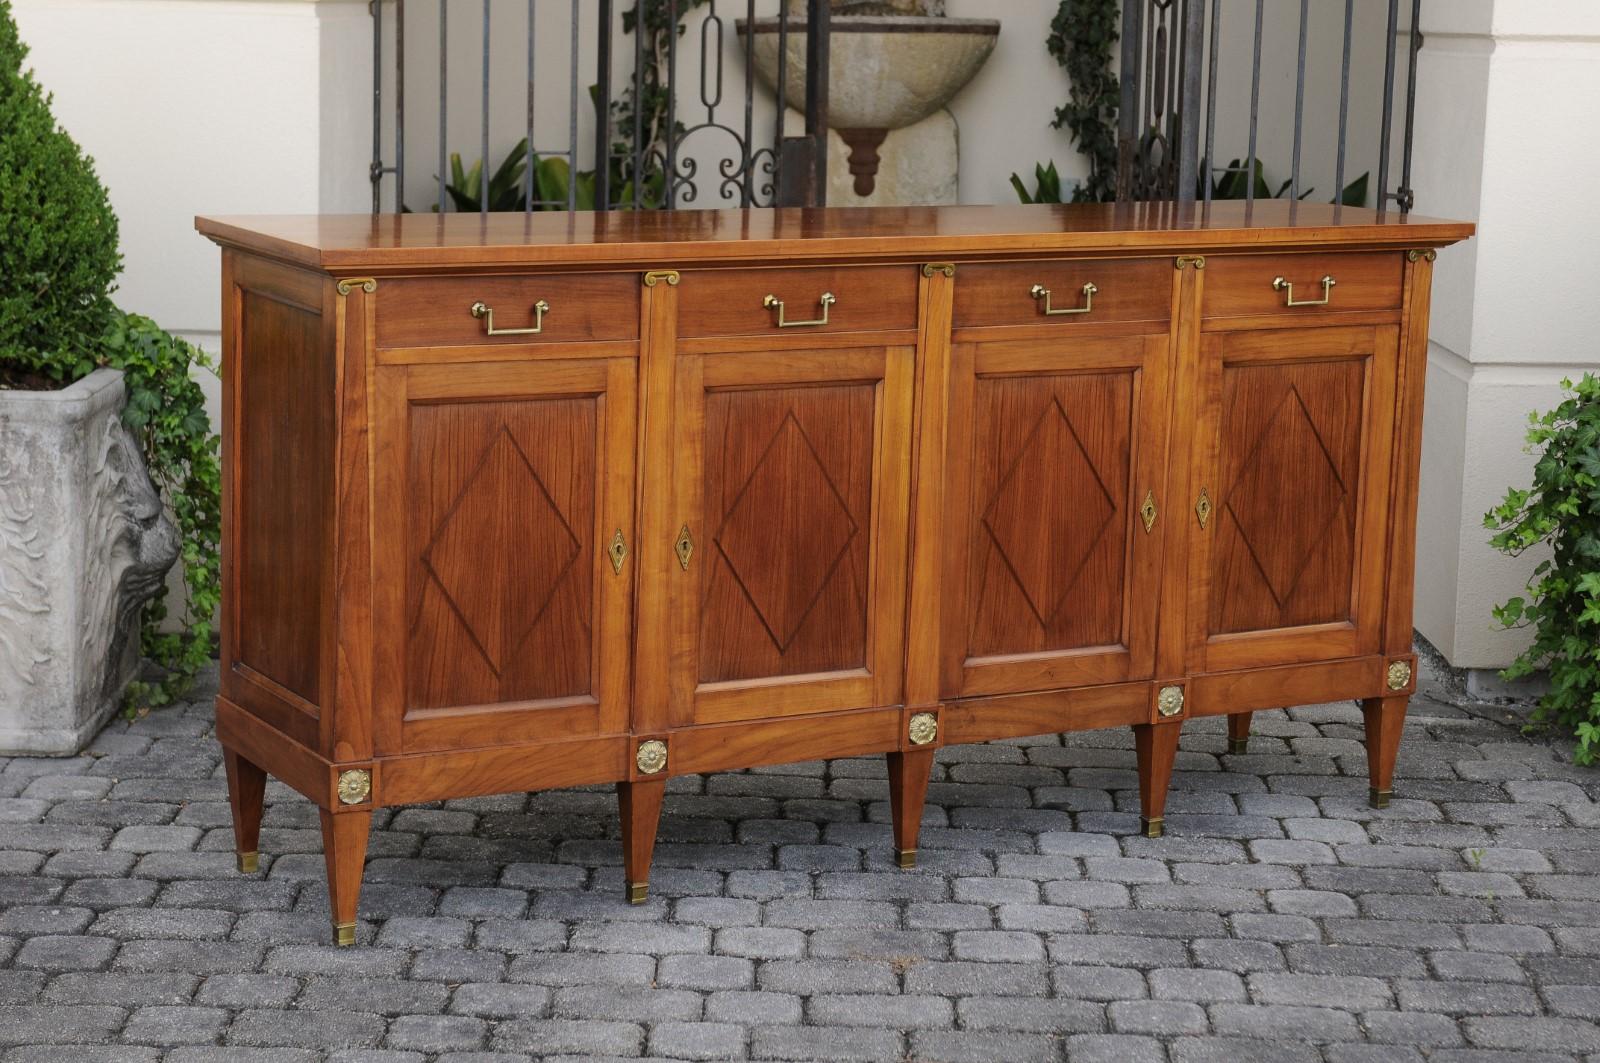 A French vintage neoclassical style walnut enfilade from the mid-20th century, with Ionic pilasters, diamond motifs, four drawers over four doors. Born in France during the midcentury period, this exquisite walnut enfilade features a rectangular top